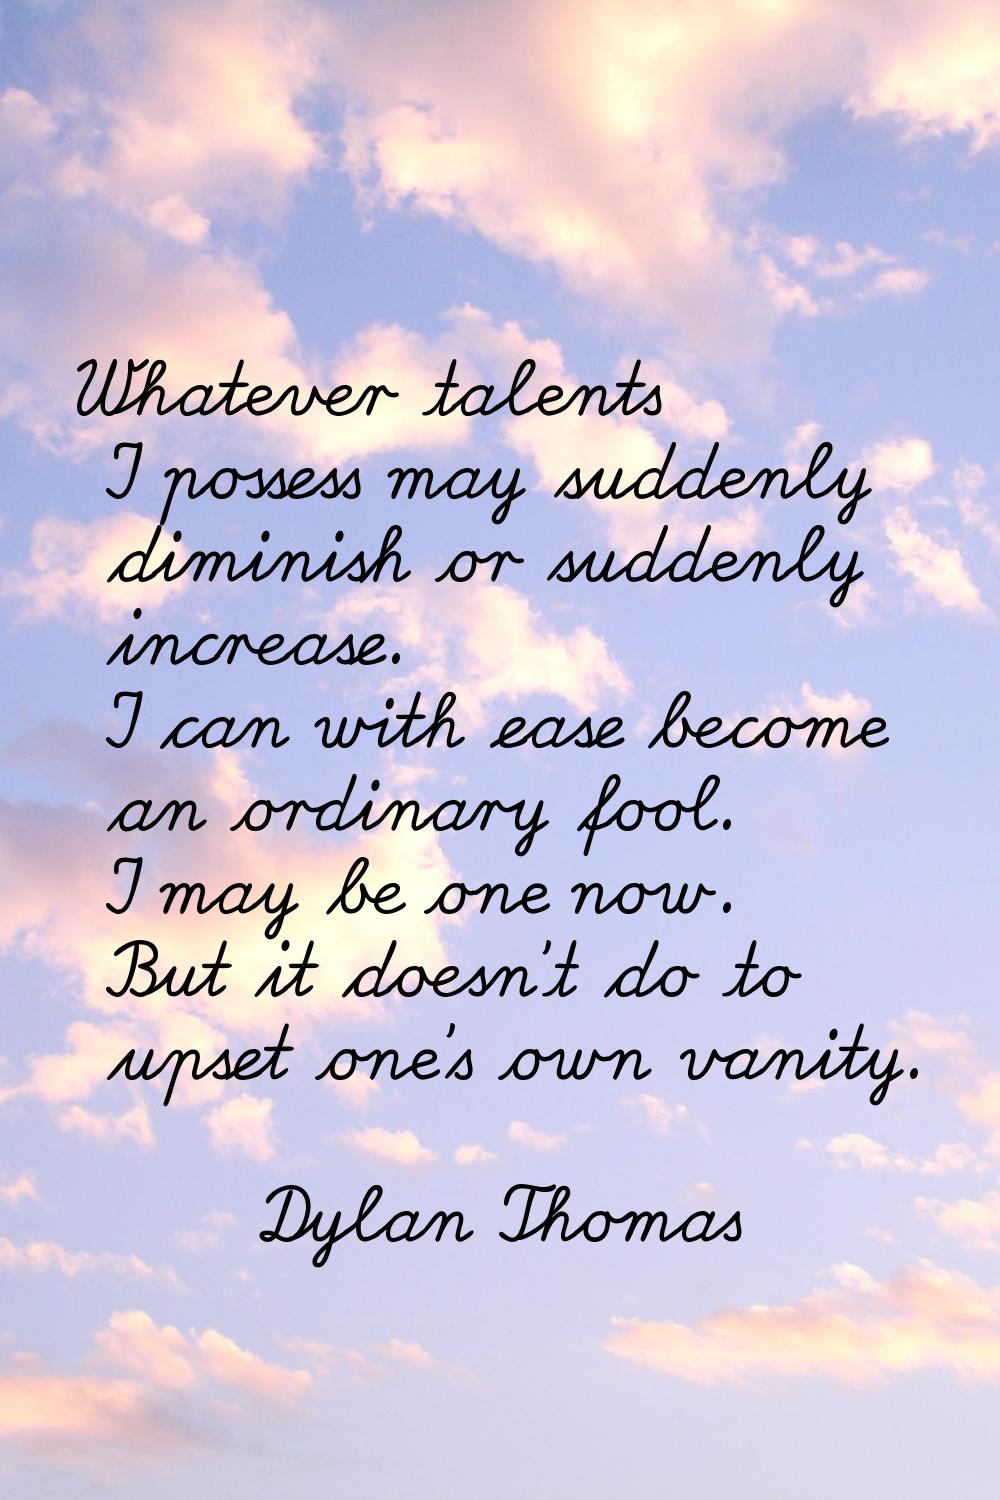 Whatever talents I possess may suddenly diminish or suddenly increase. I can with ease become an or